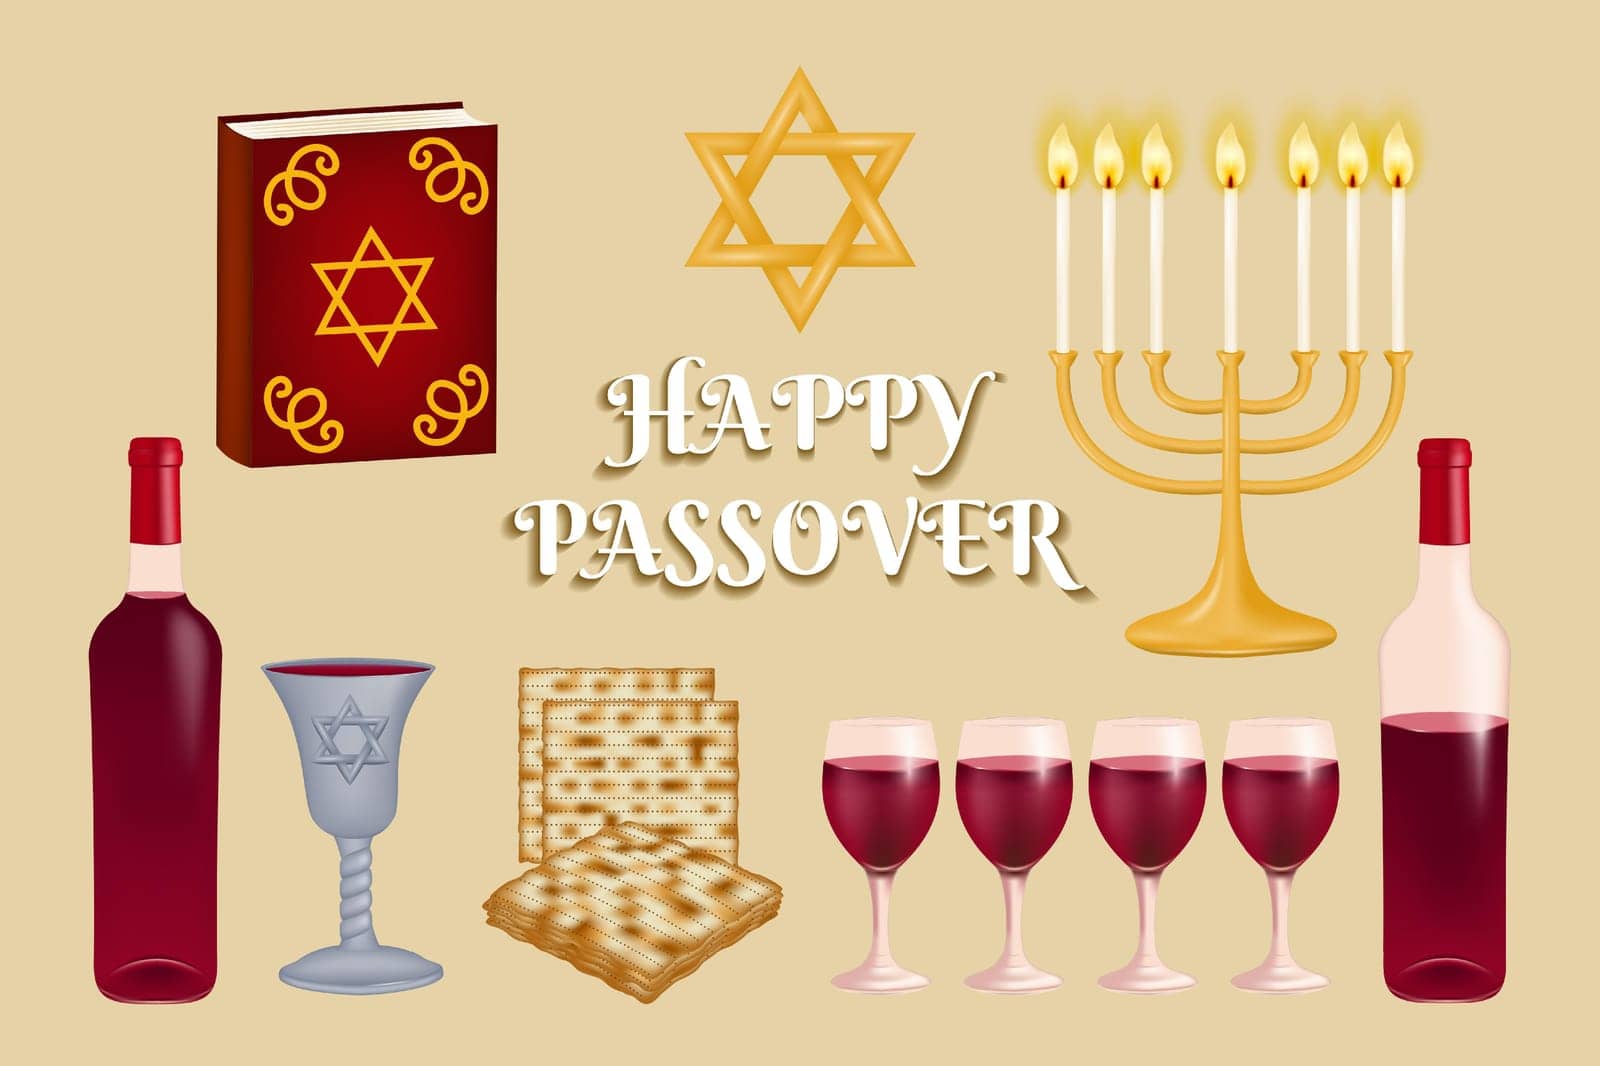 Jewish symbols for the holiday of Happy Passover. by Mallva